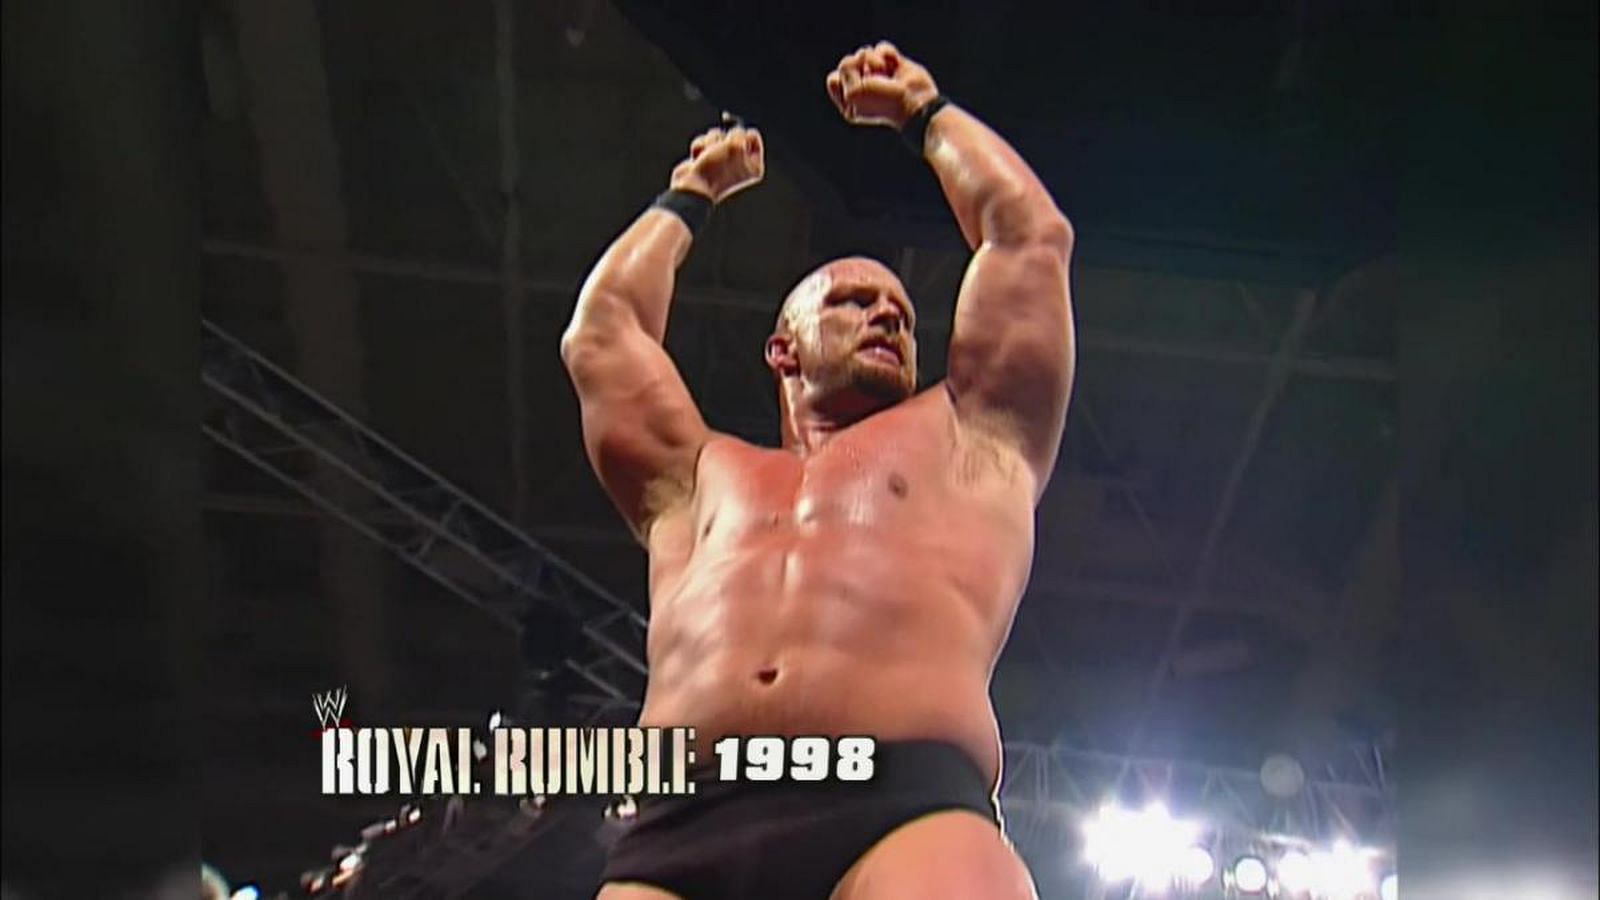 There has been plenty of iconic Royal Rumble victories throughout the 34 years of the event.